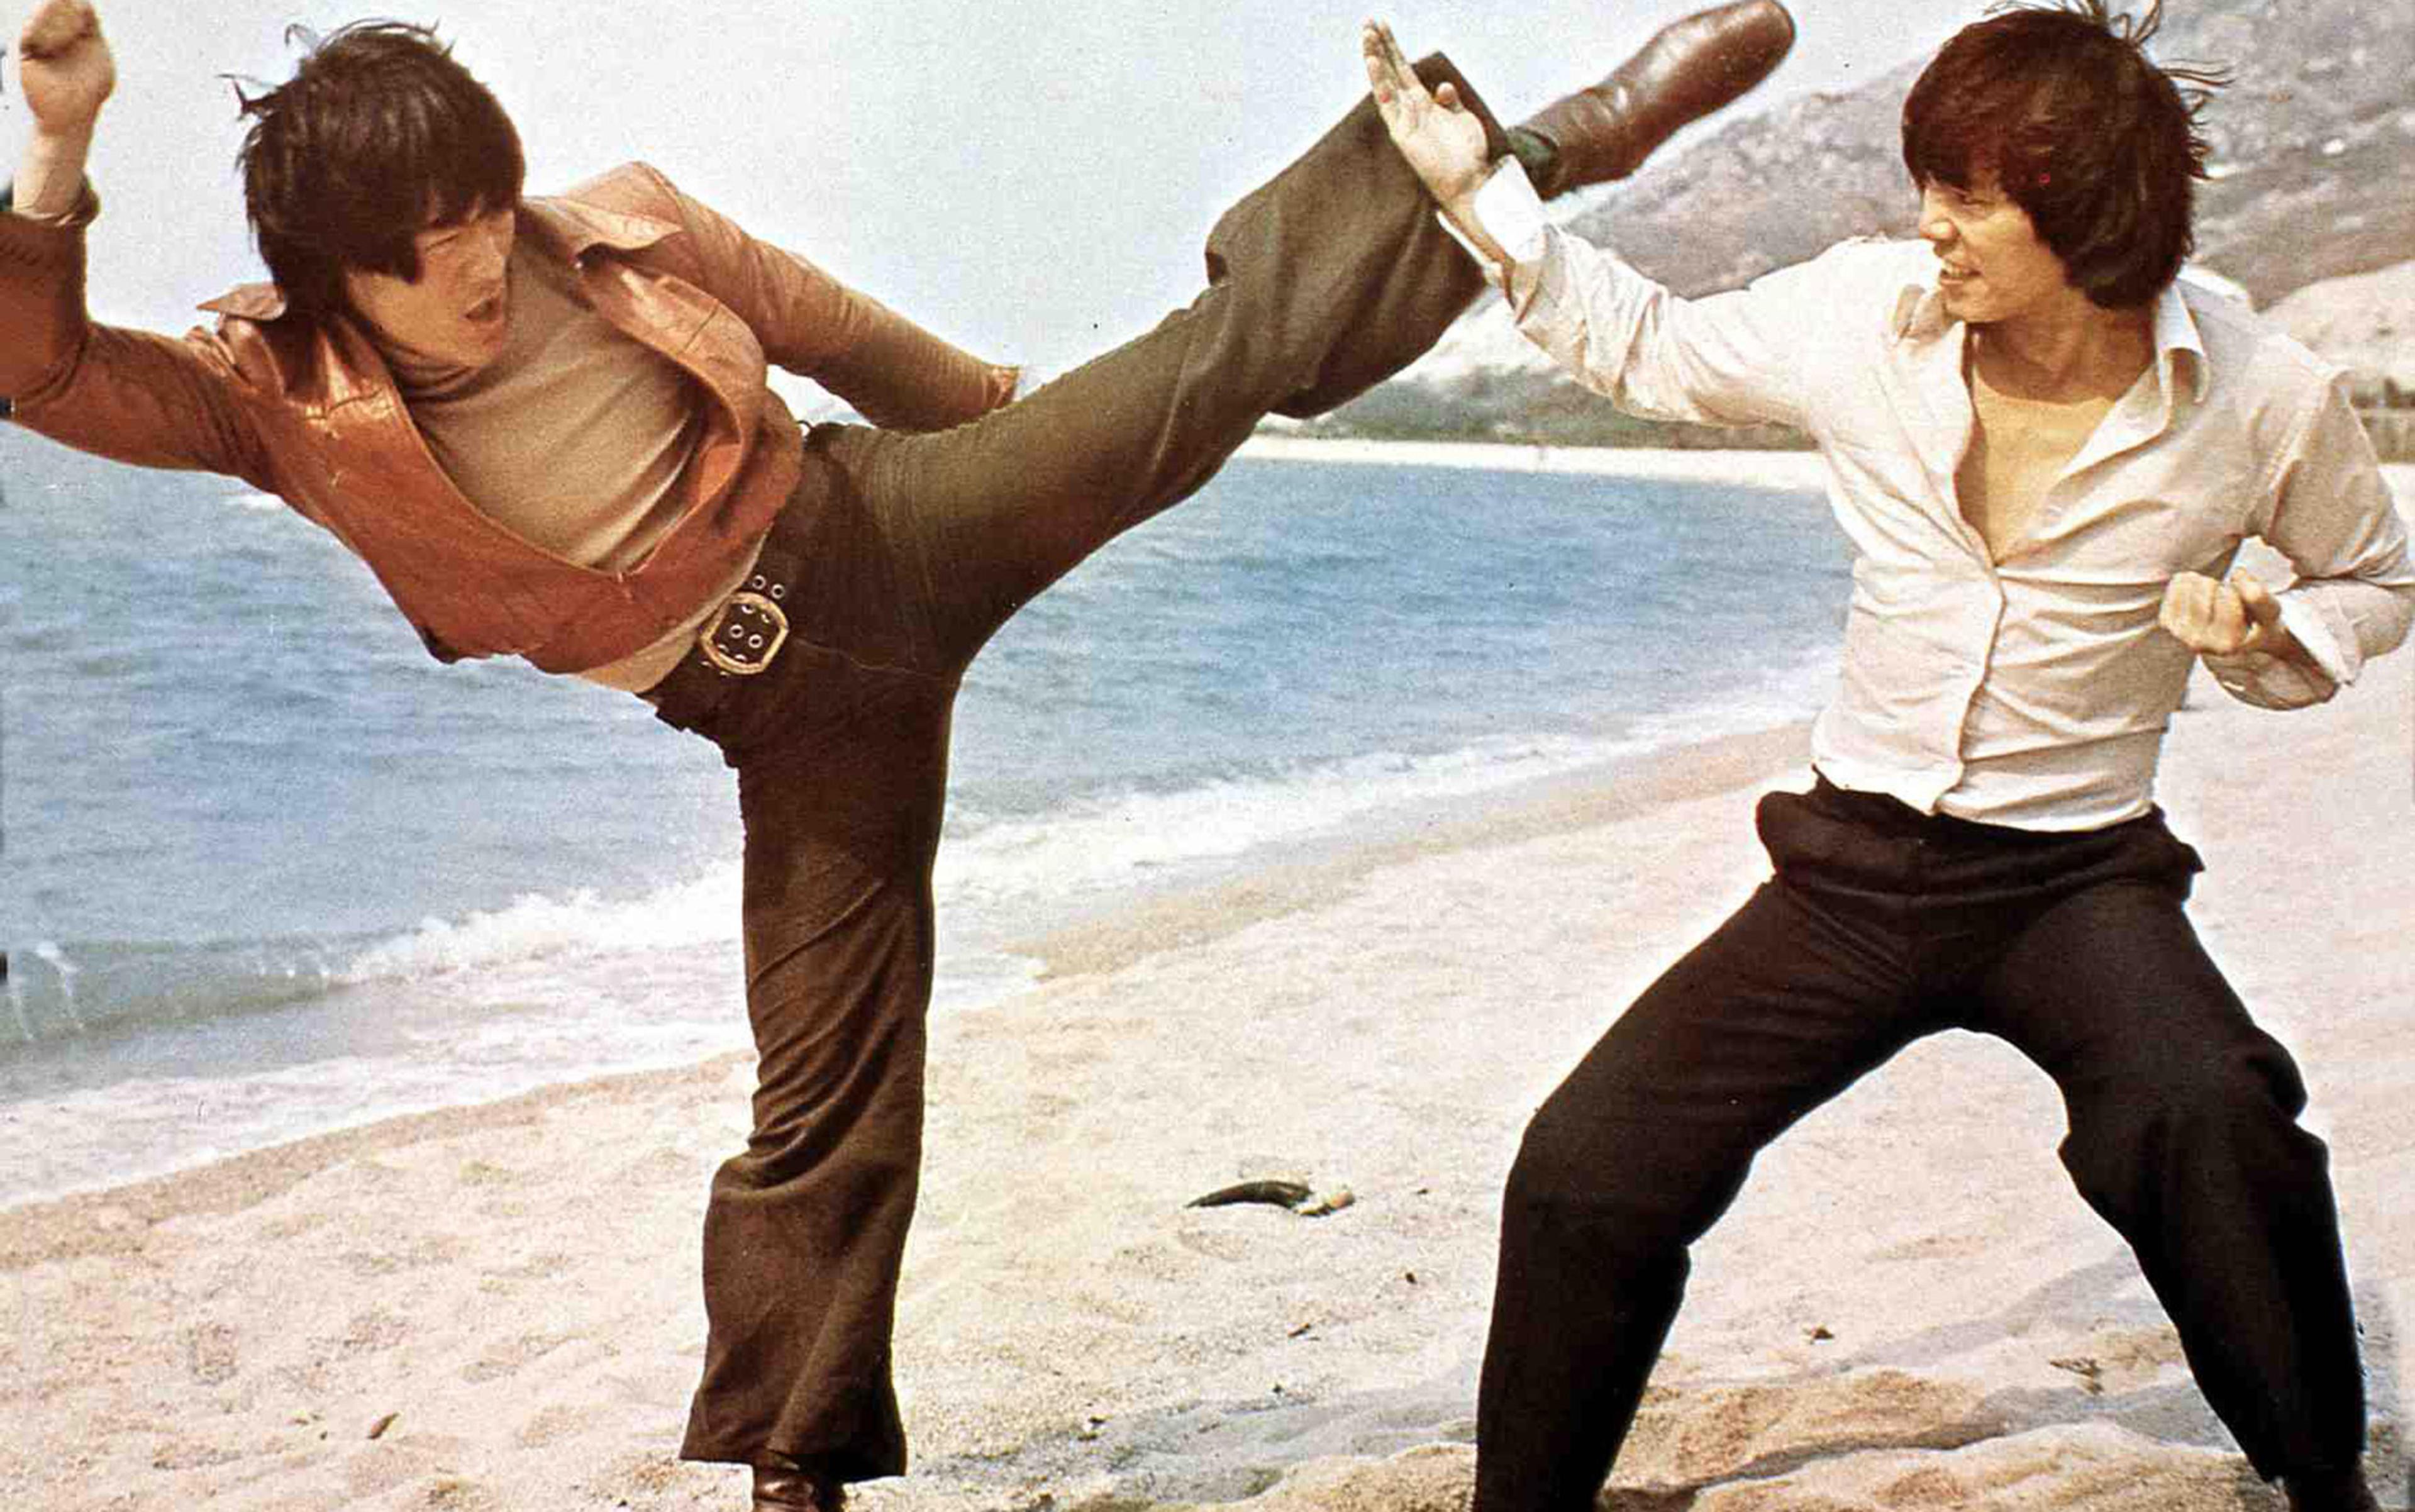 Can pop culture kick the kung fu Asian stereotyping habit? | Aeon Essays